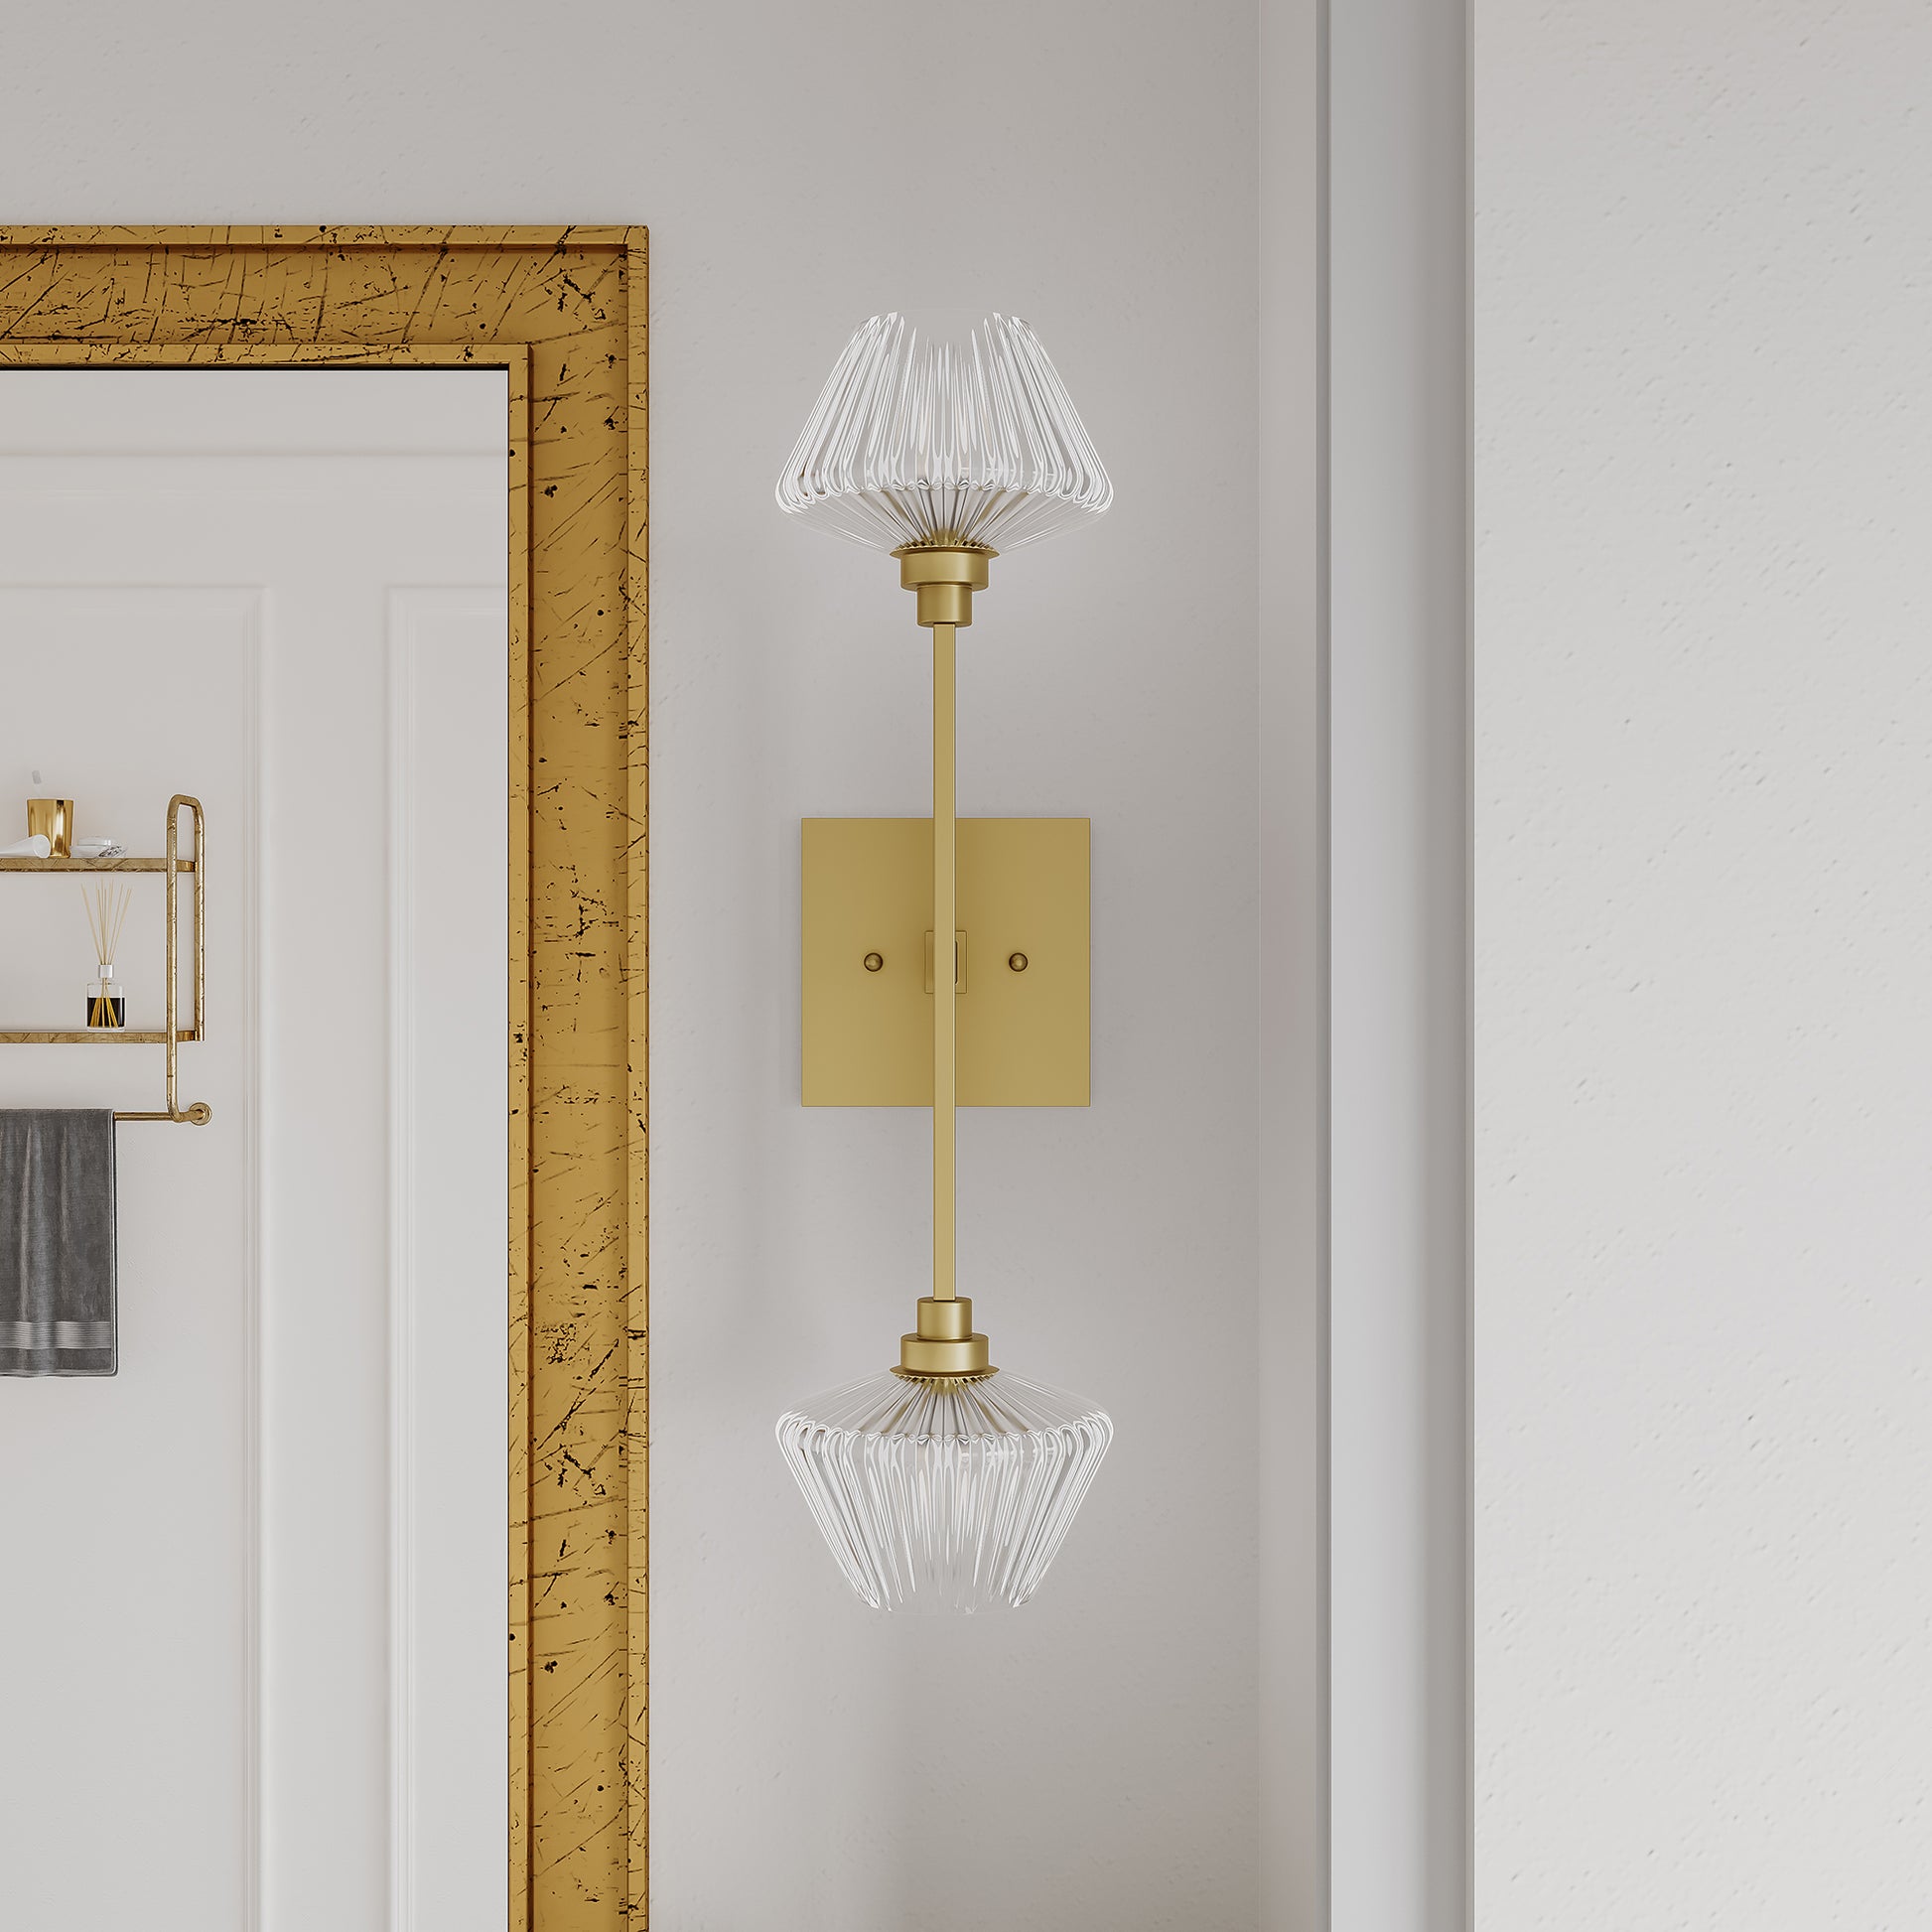 2 light gold glass wallchiere (3) by ACROMA